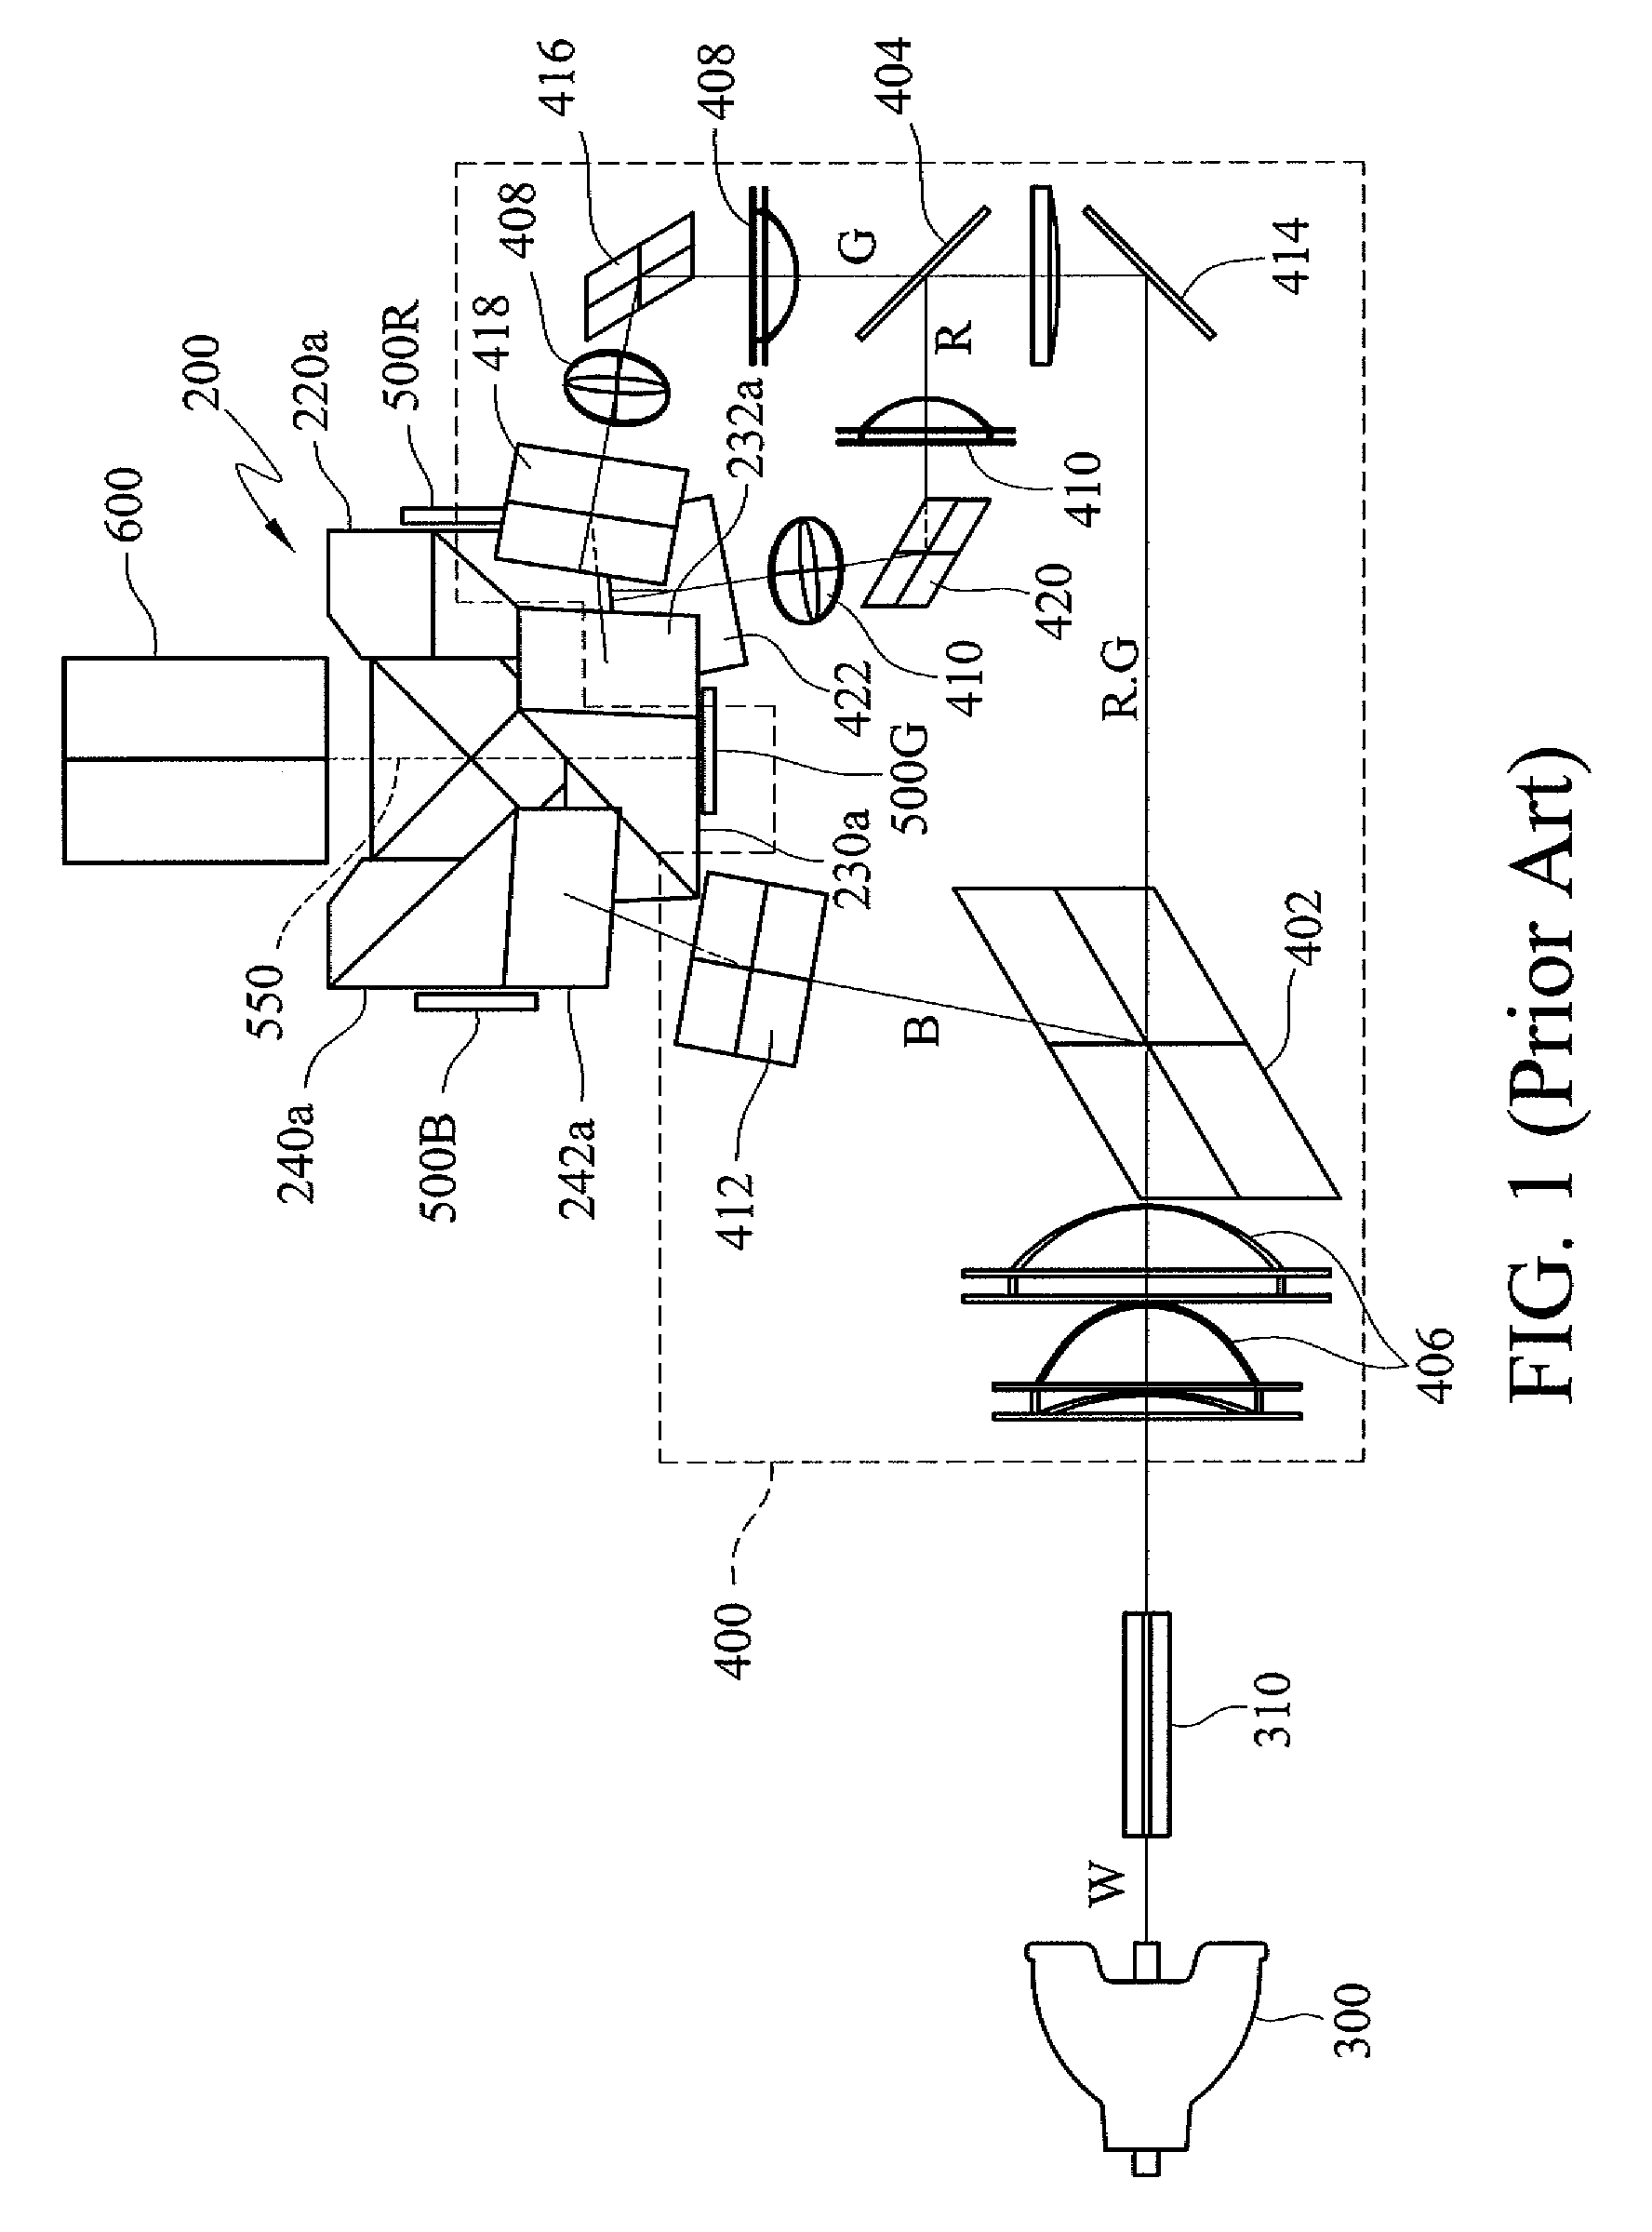 Optical processing structure for a digital light processing projection device